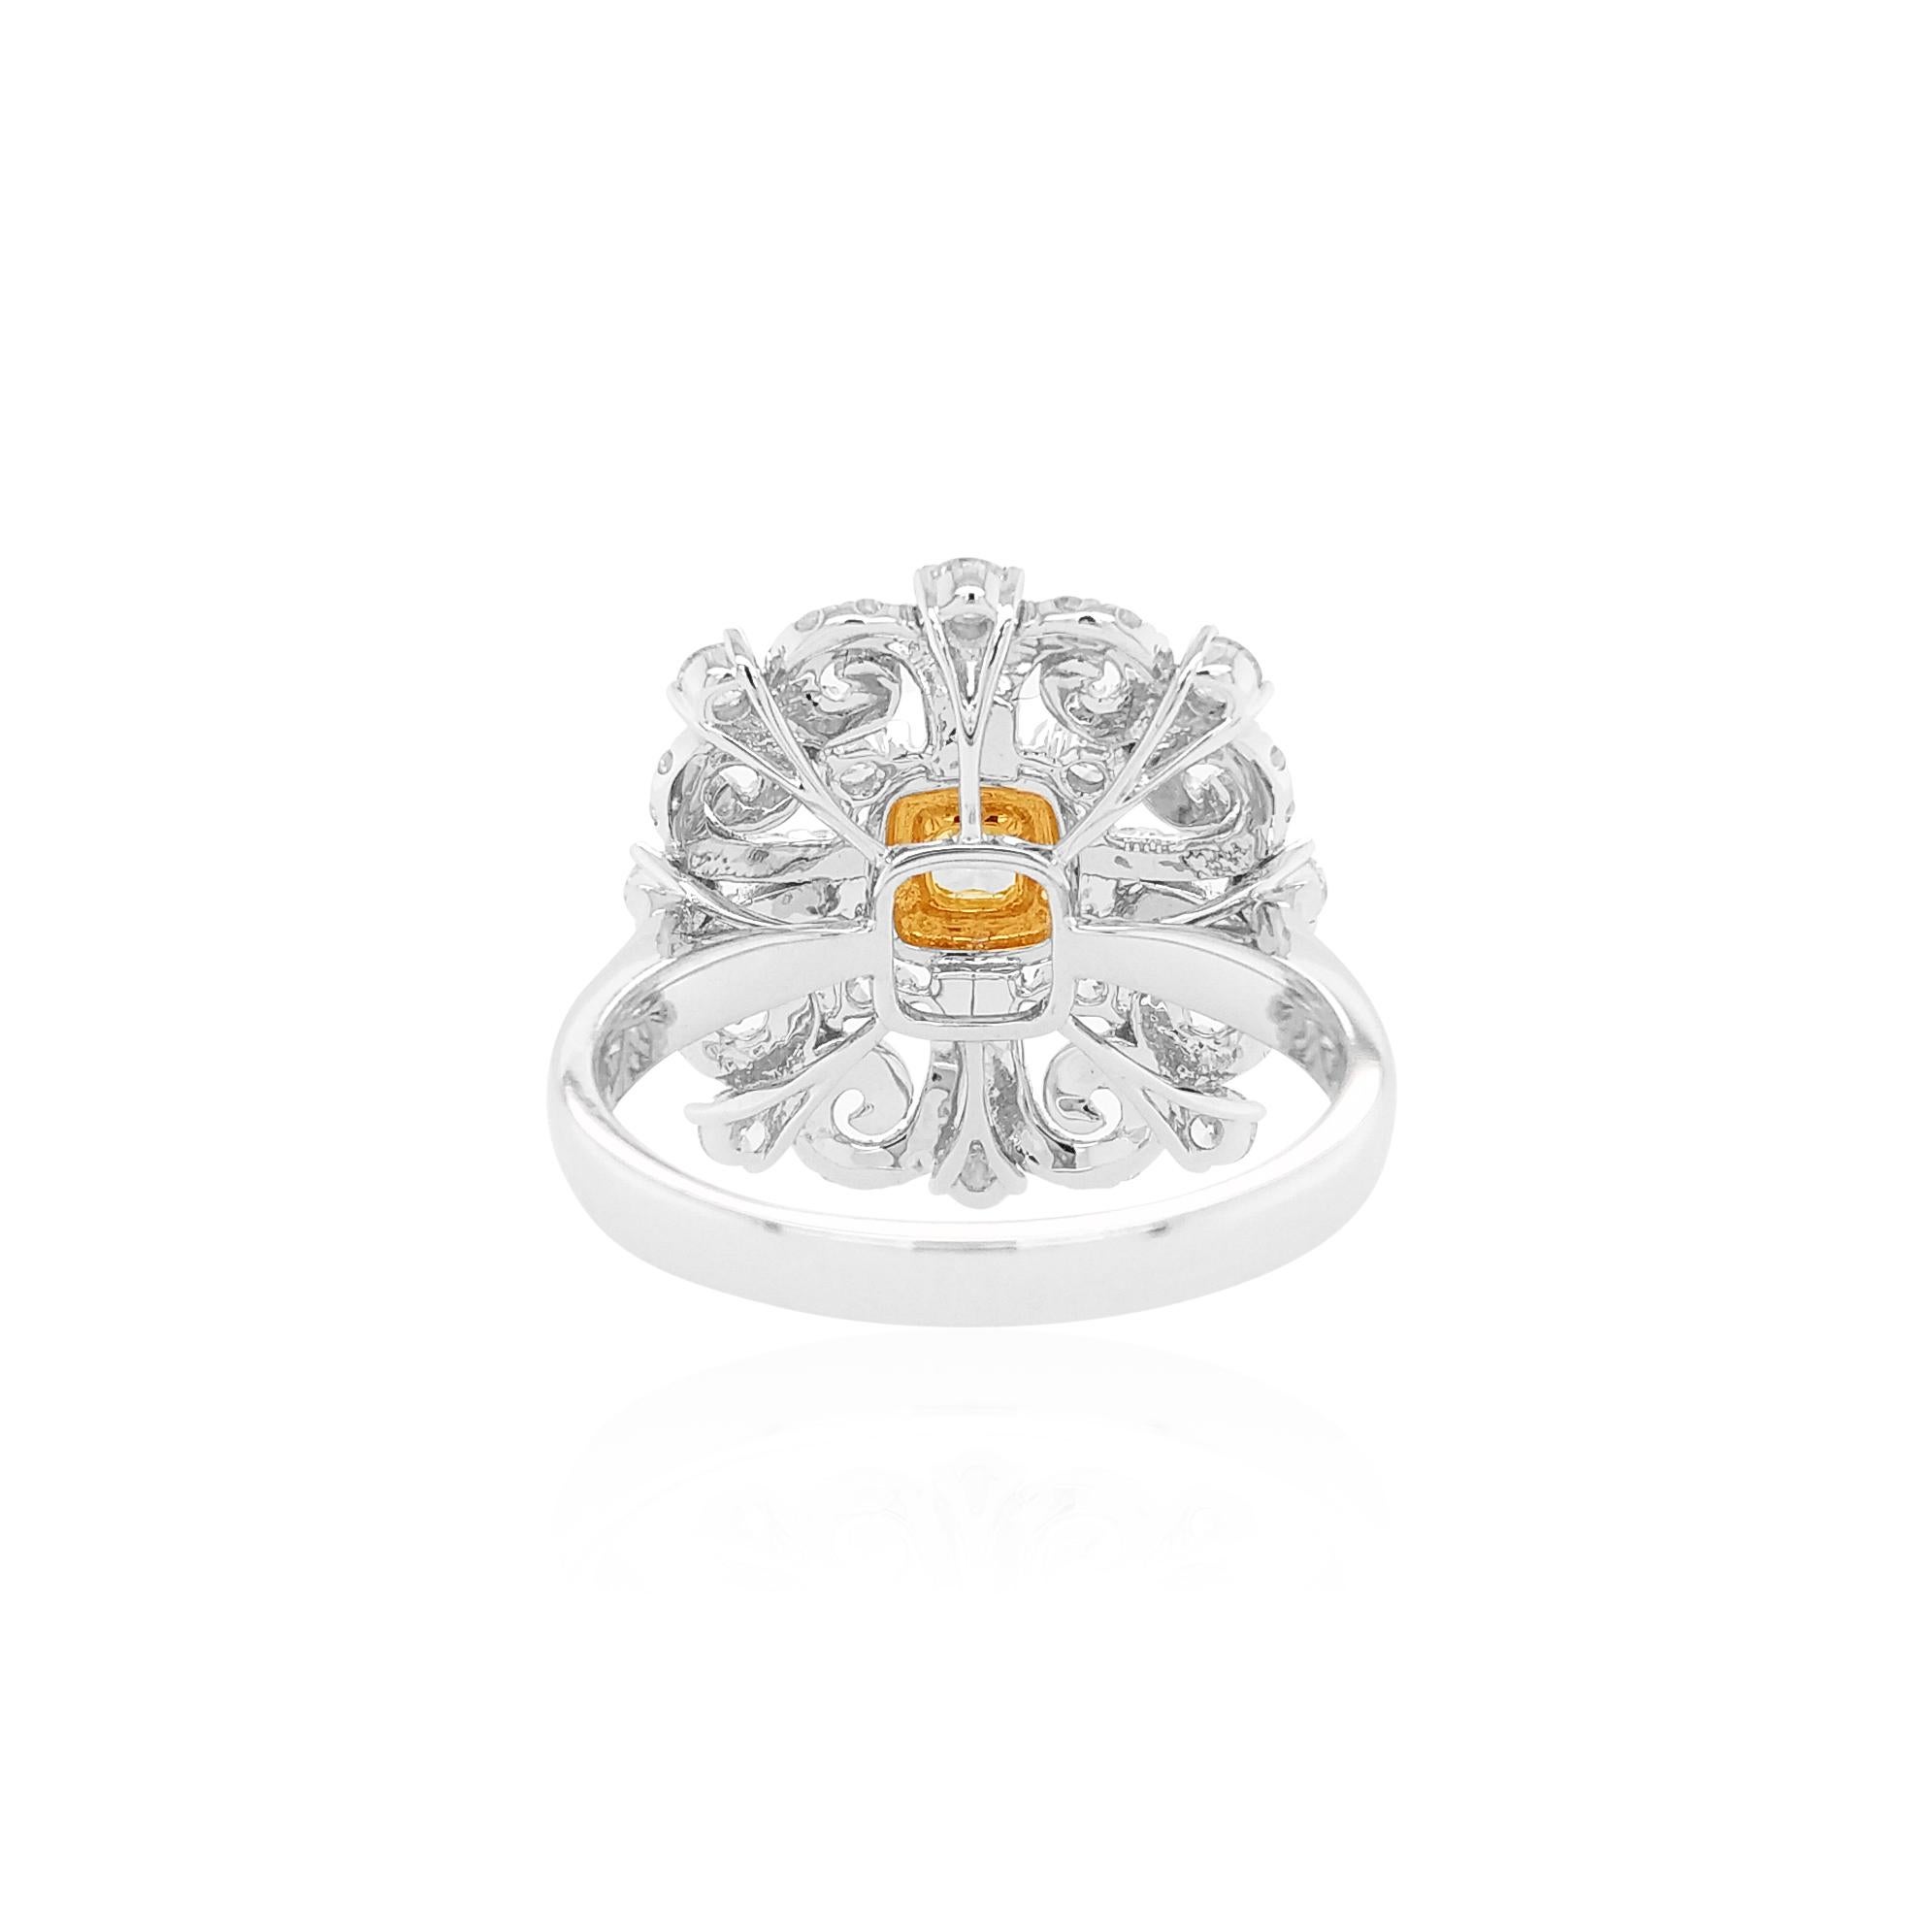 This stunning 18 Karat White Gold ring features a rich hue Fancy Intense Yellow Diamond at its centre, surrounded by a halo of Yellow Diamonds and a bold pattern of scintillating White Diamonds which enables the light to sparkle in a unique way. Set